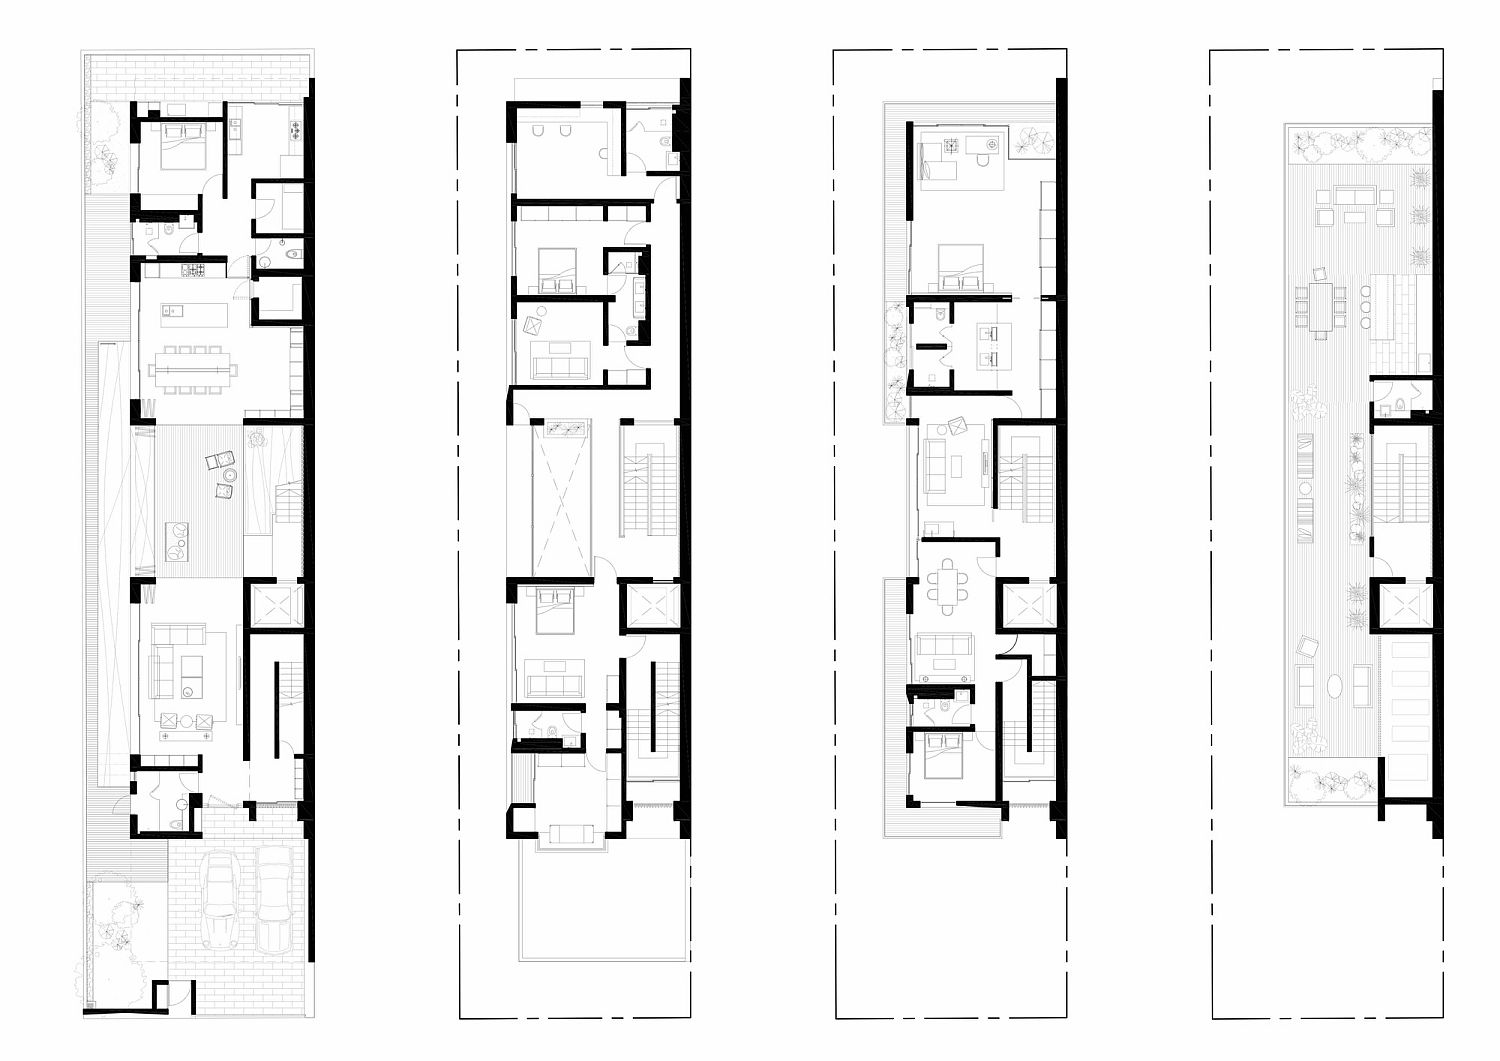 Floor-plan-of-22-Toh-Yi-Road-contemporary-house-in-Singapore